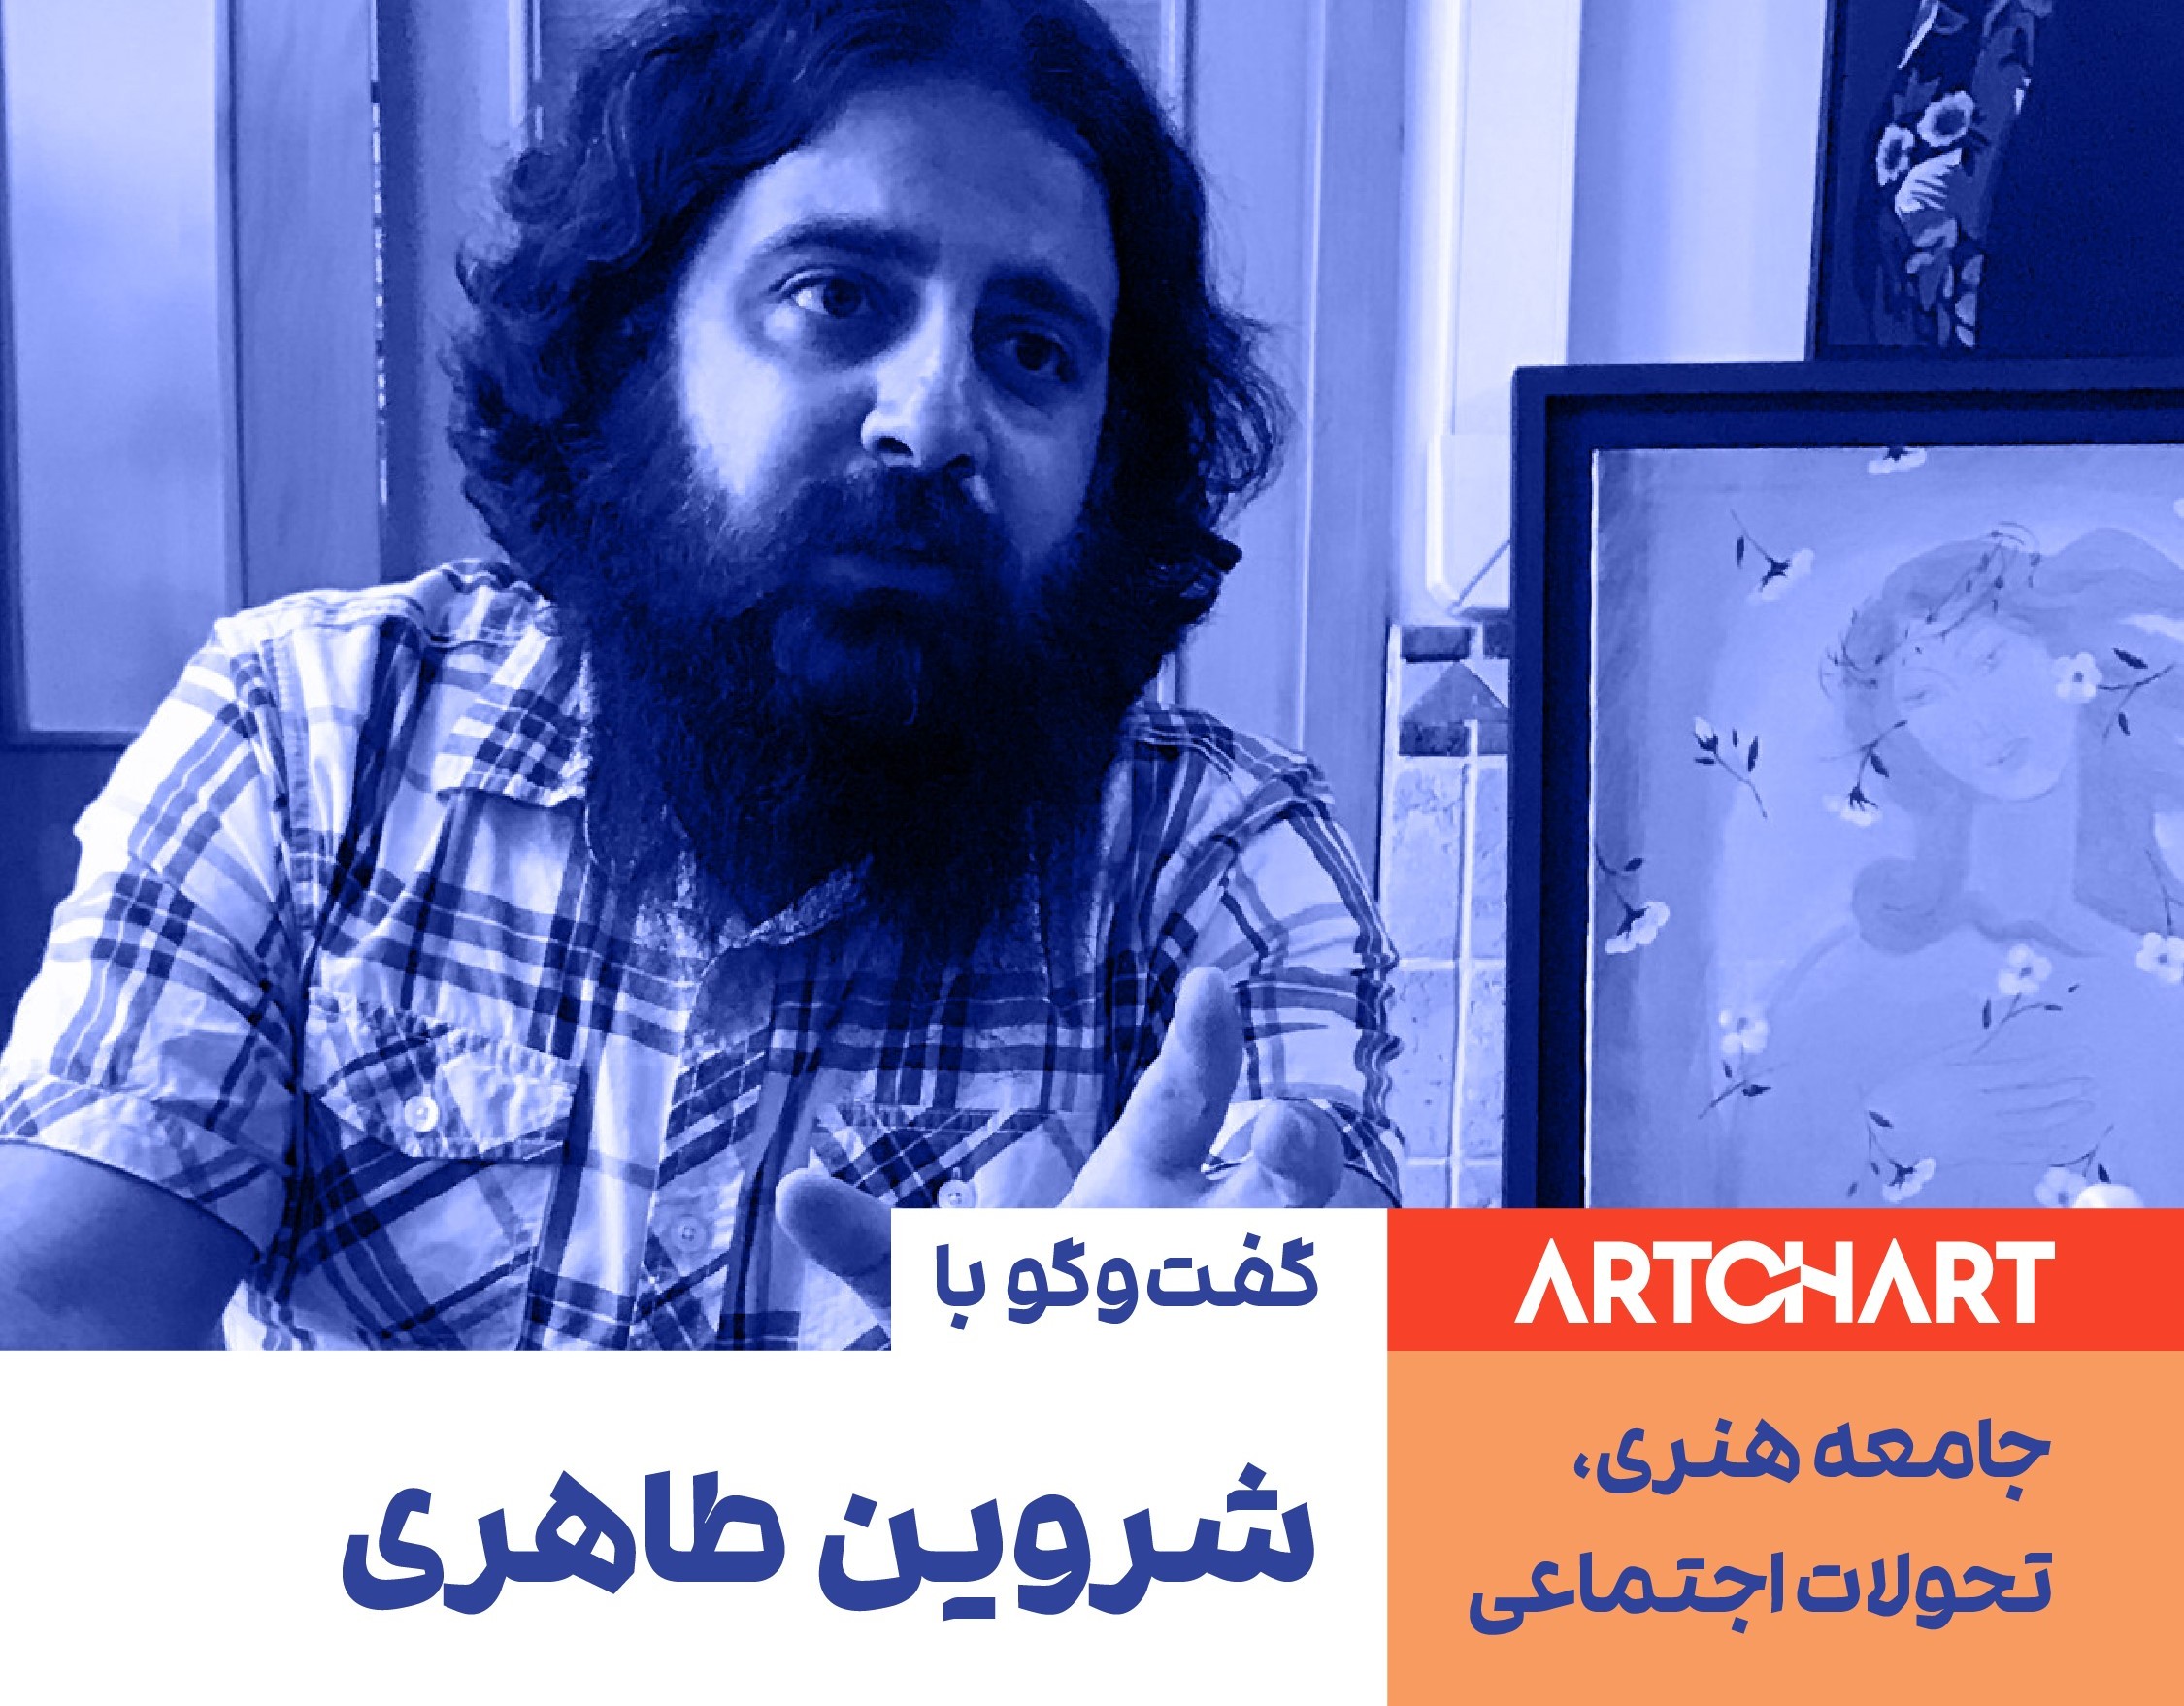 Shervin Taheri in a conversation with Artchart